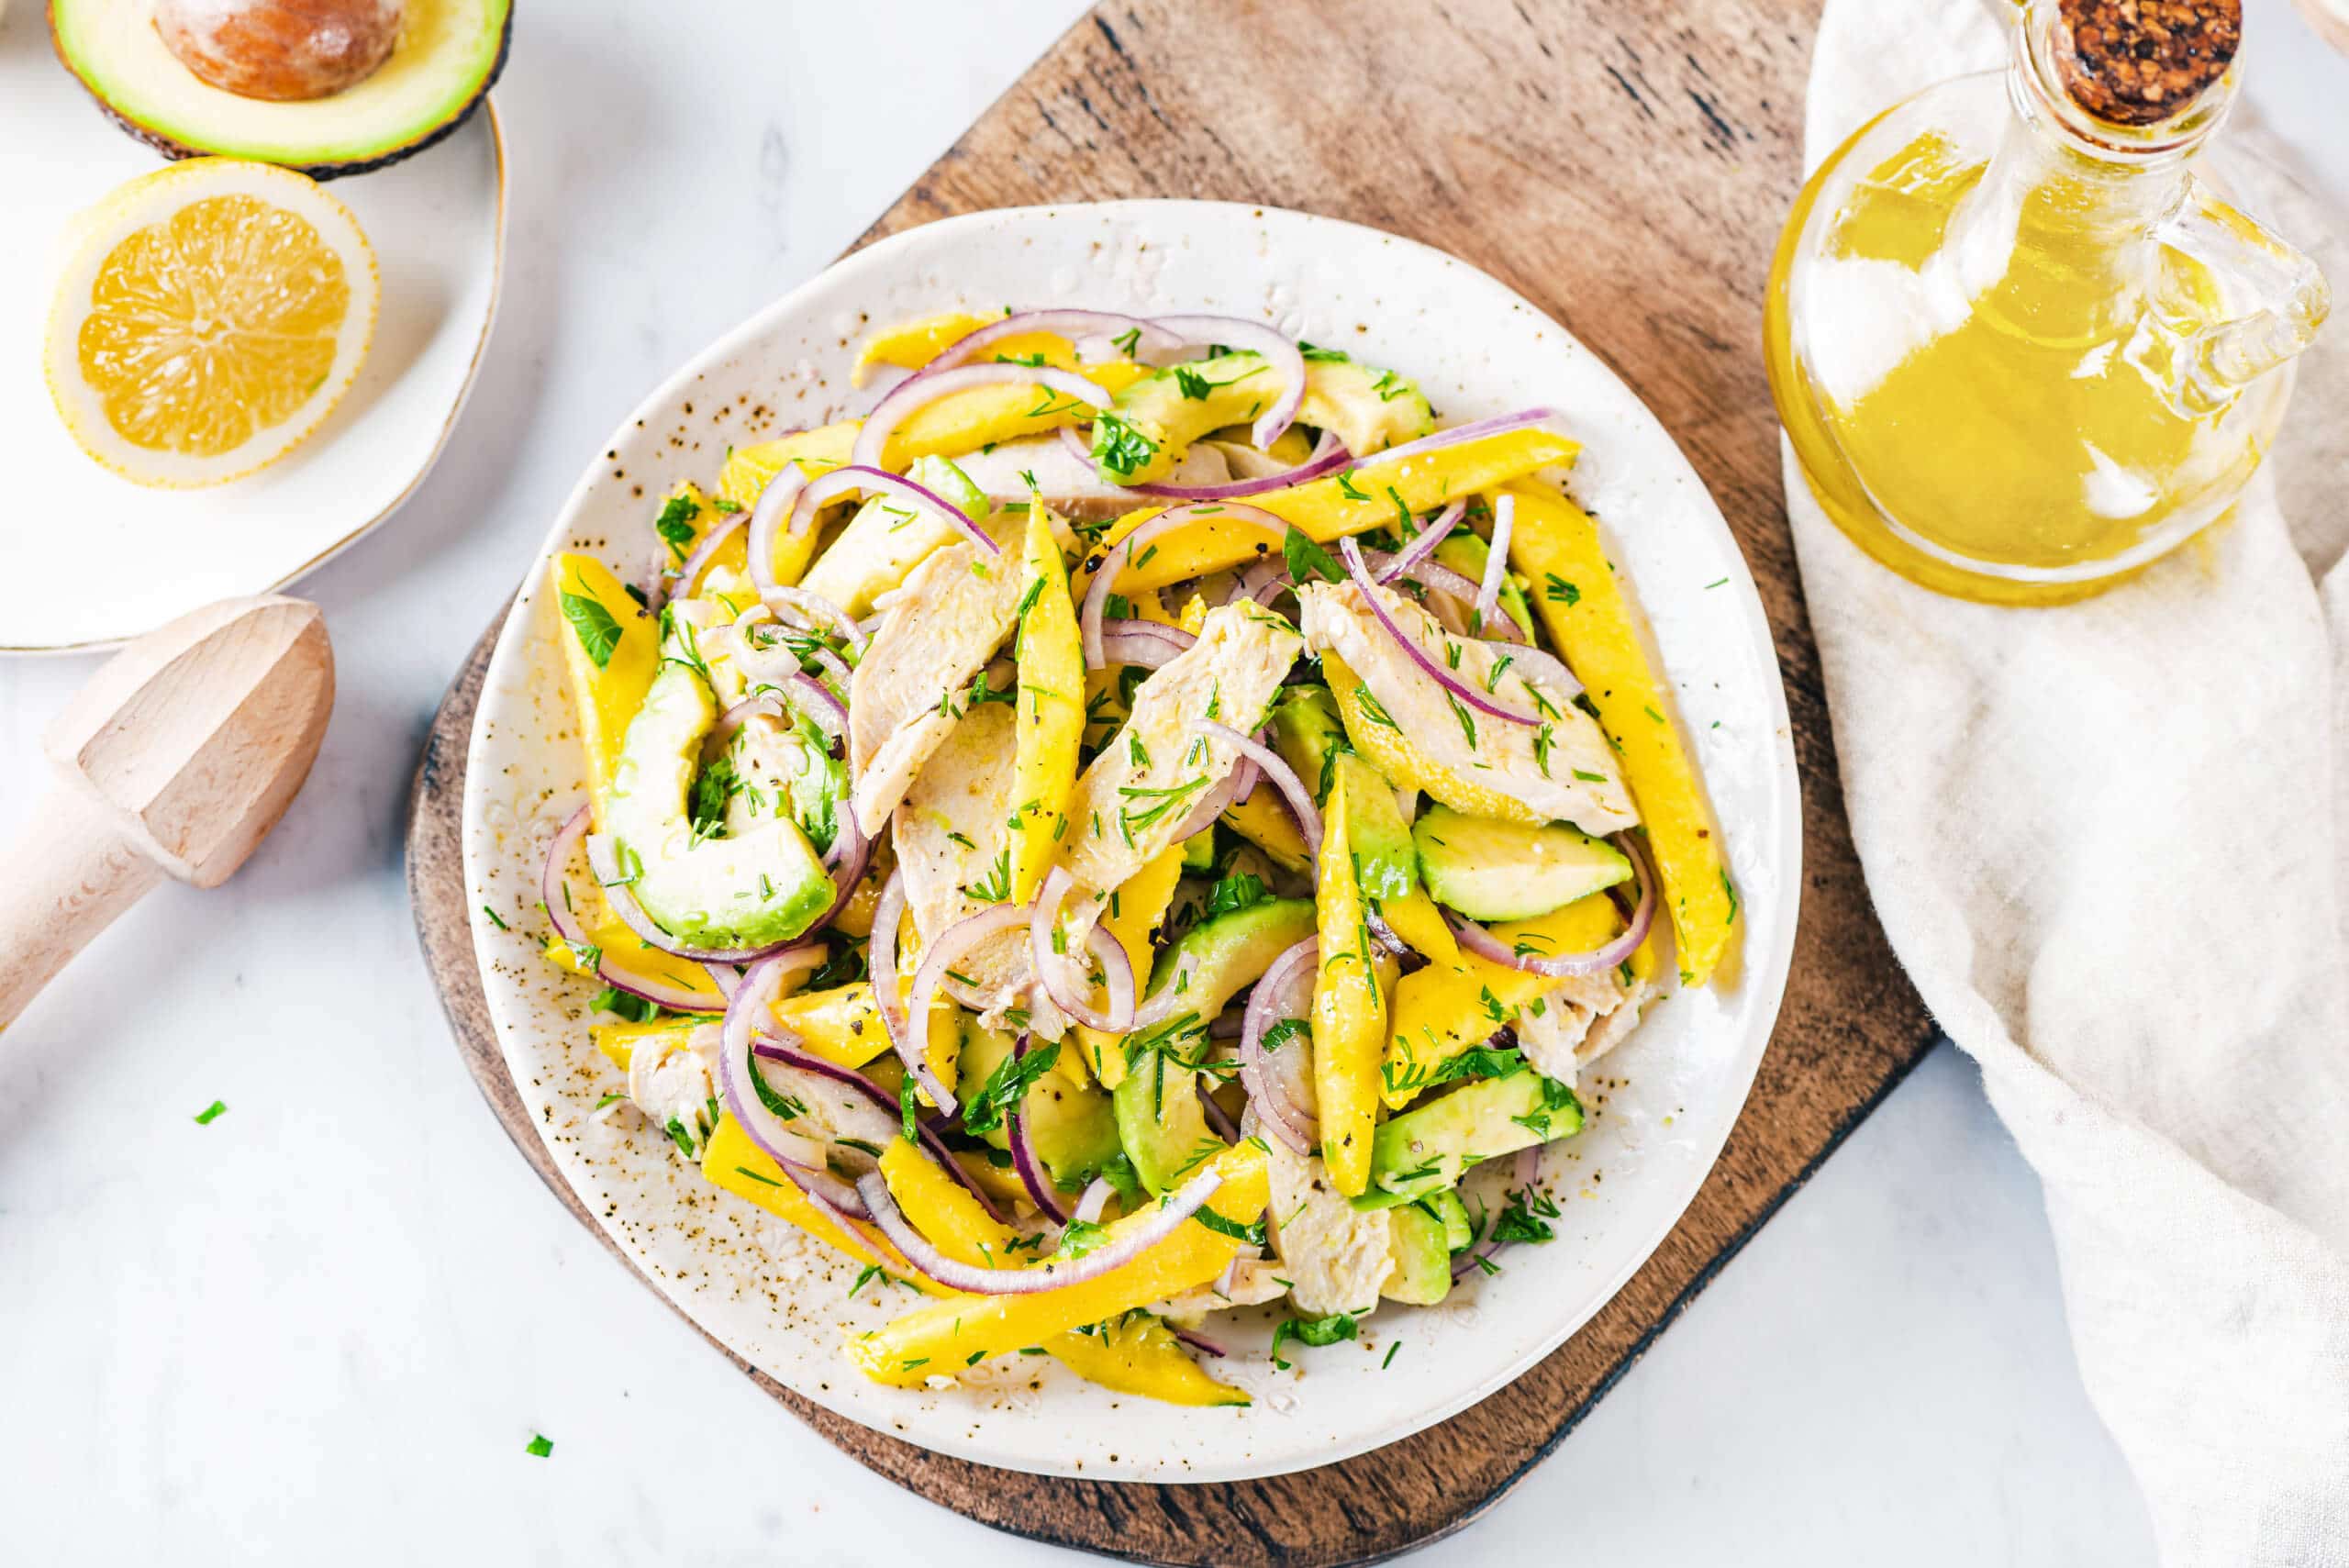 Easy Avocado and Chicken Salad with Mango